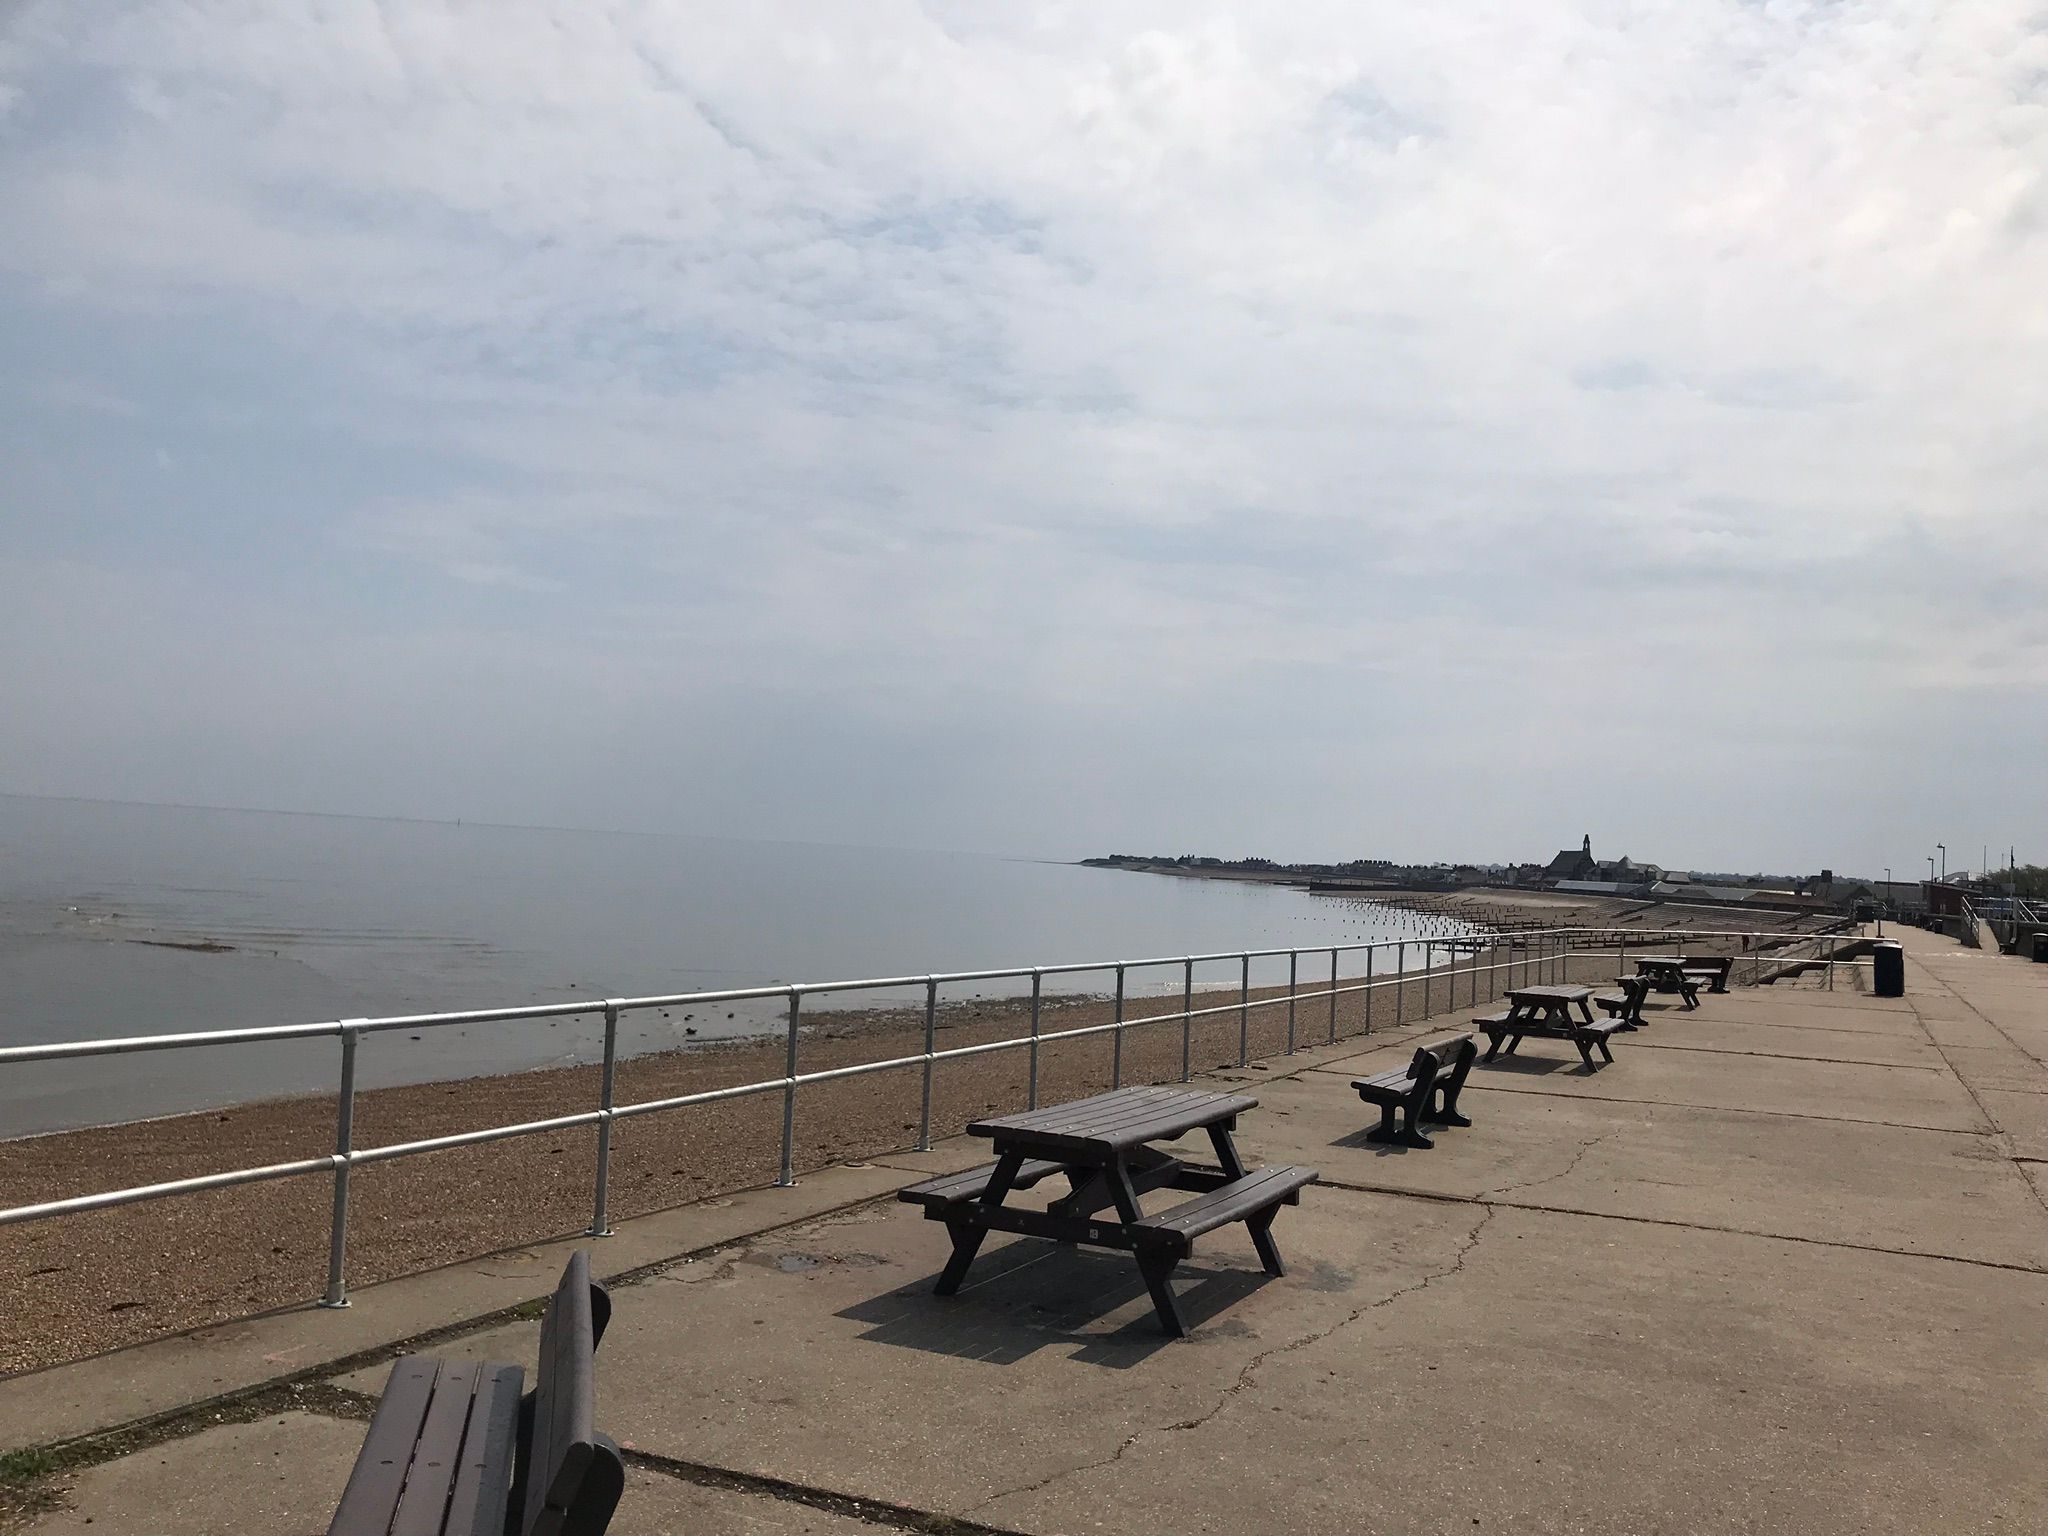 Picnic benches and tables aong the sea wall